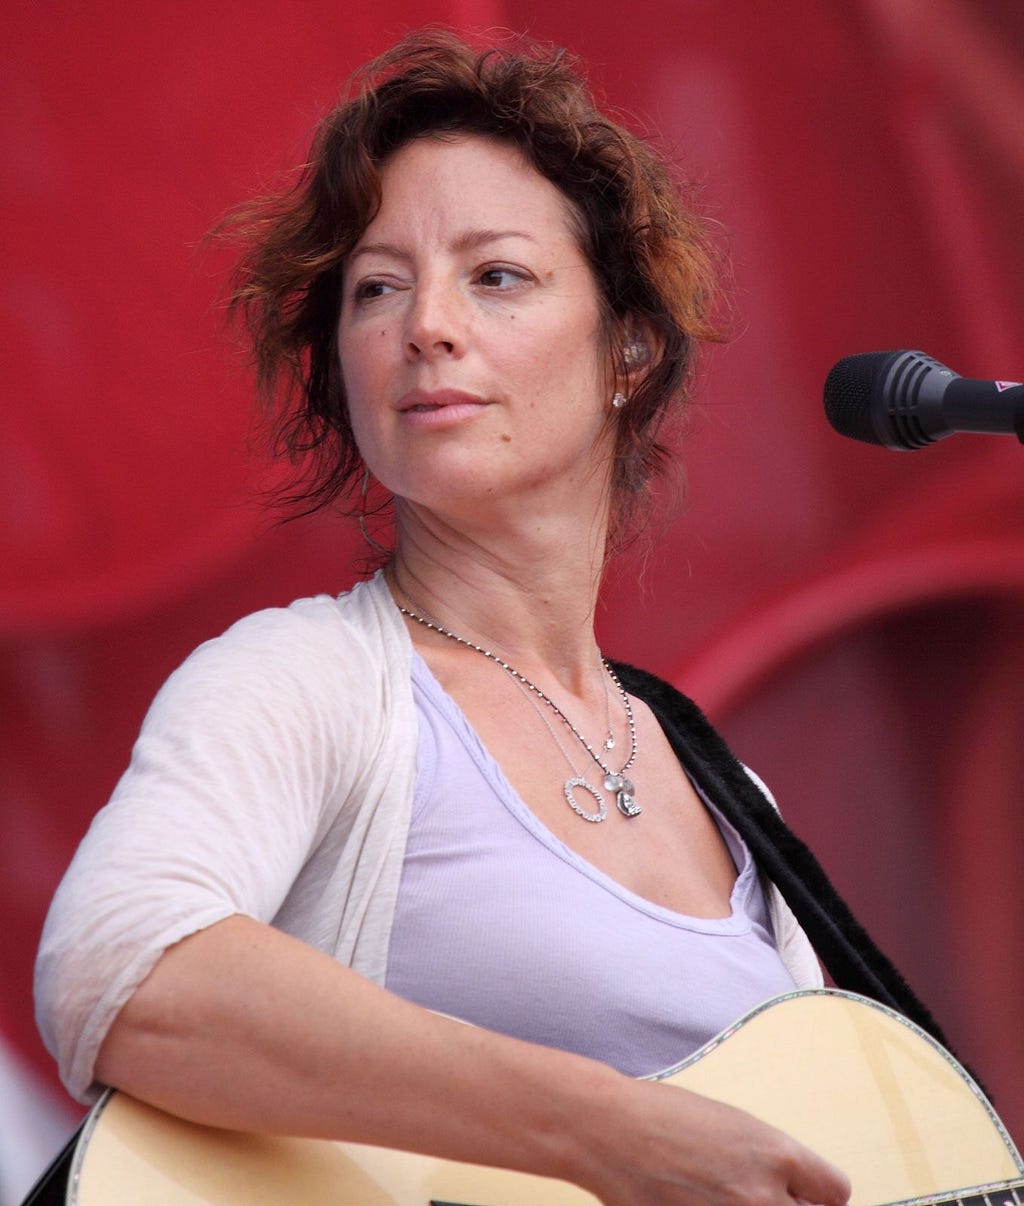 Sarah McLachlan’s enduring influence extends far beyond chart-topping hits.